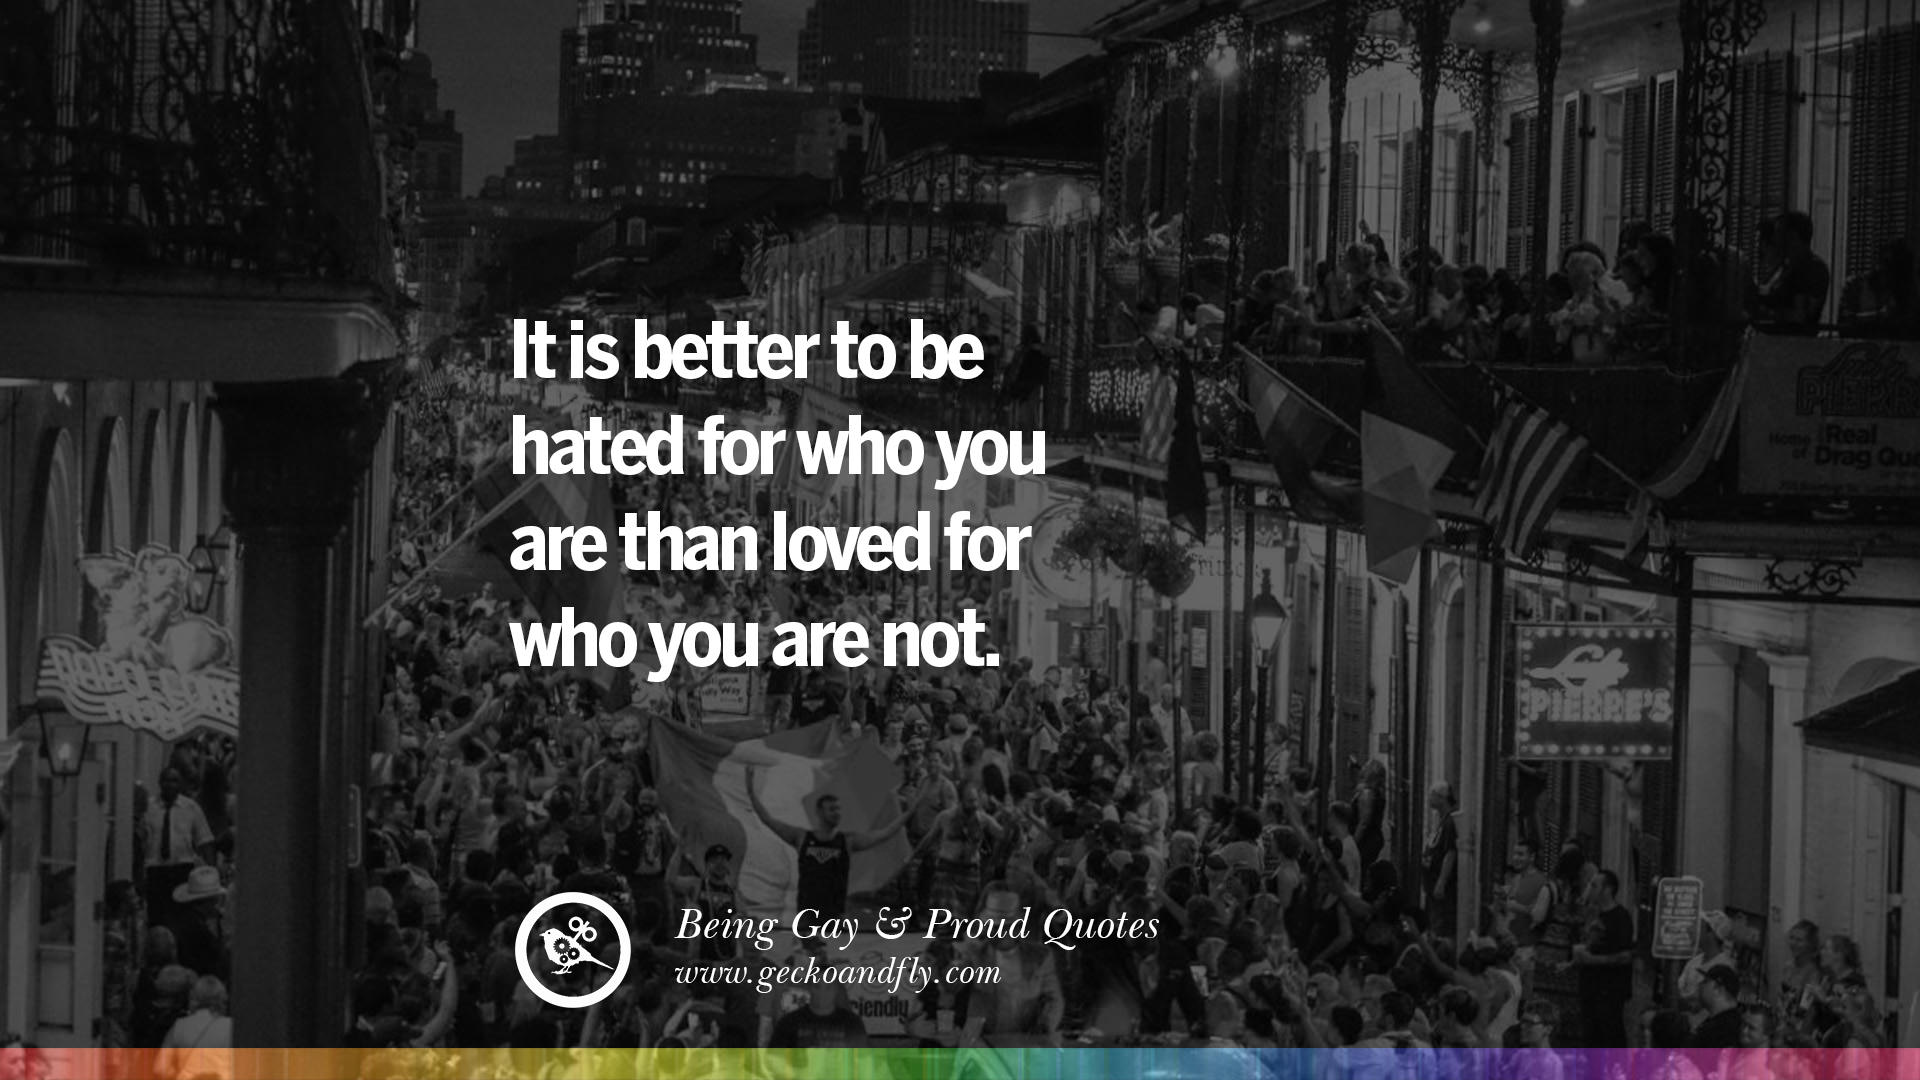 It is better to be hated for who you are than loved for who you are not